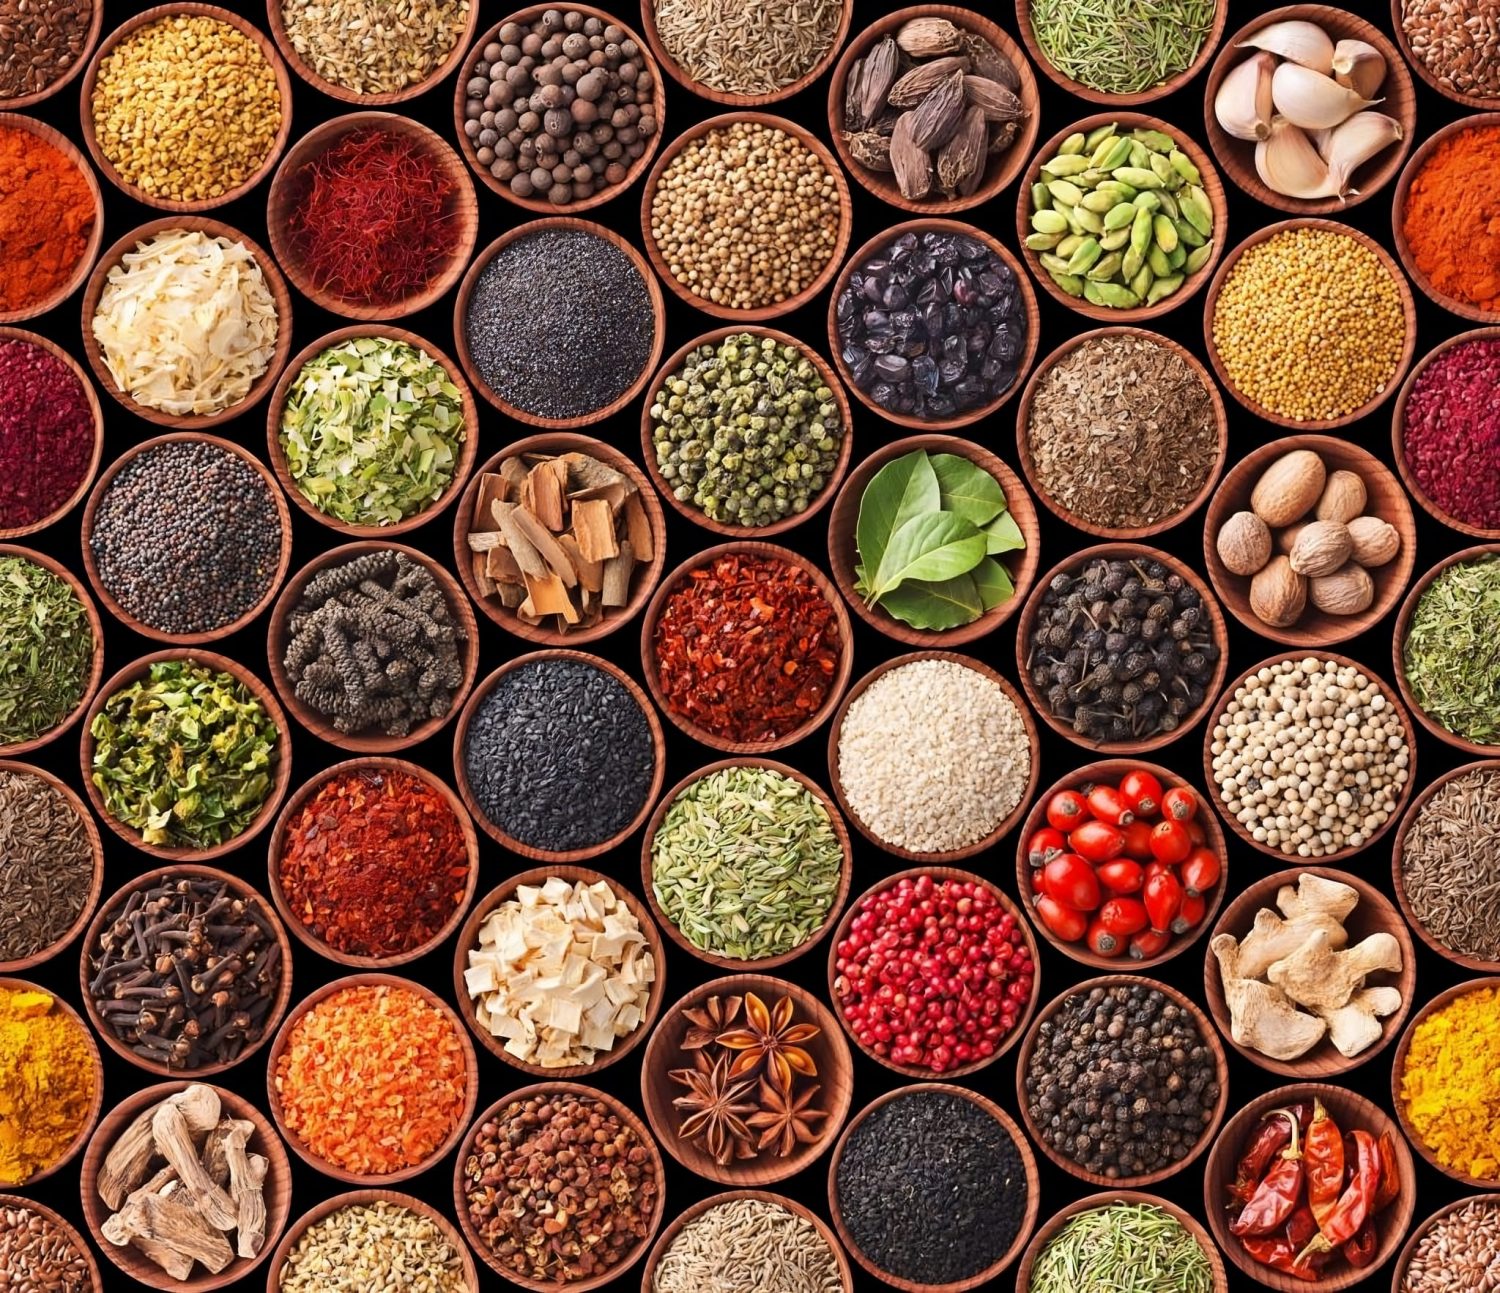 Every chef should take note: the right combination of spices